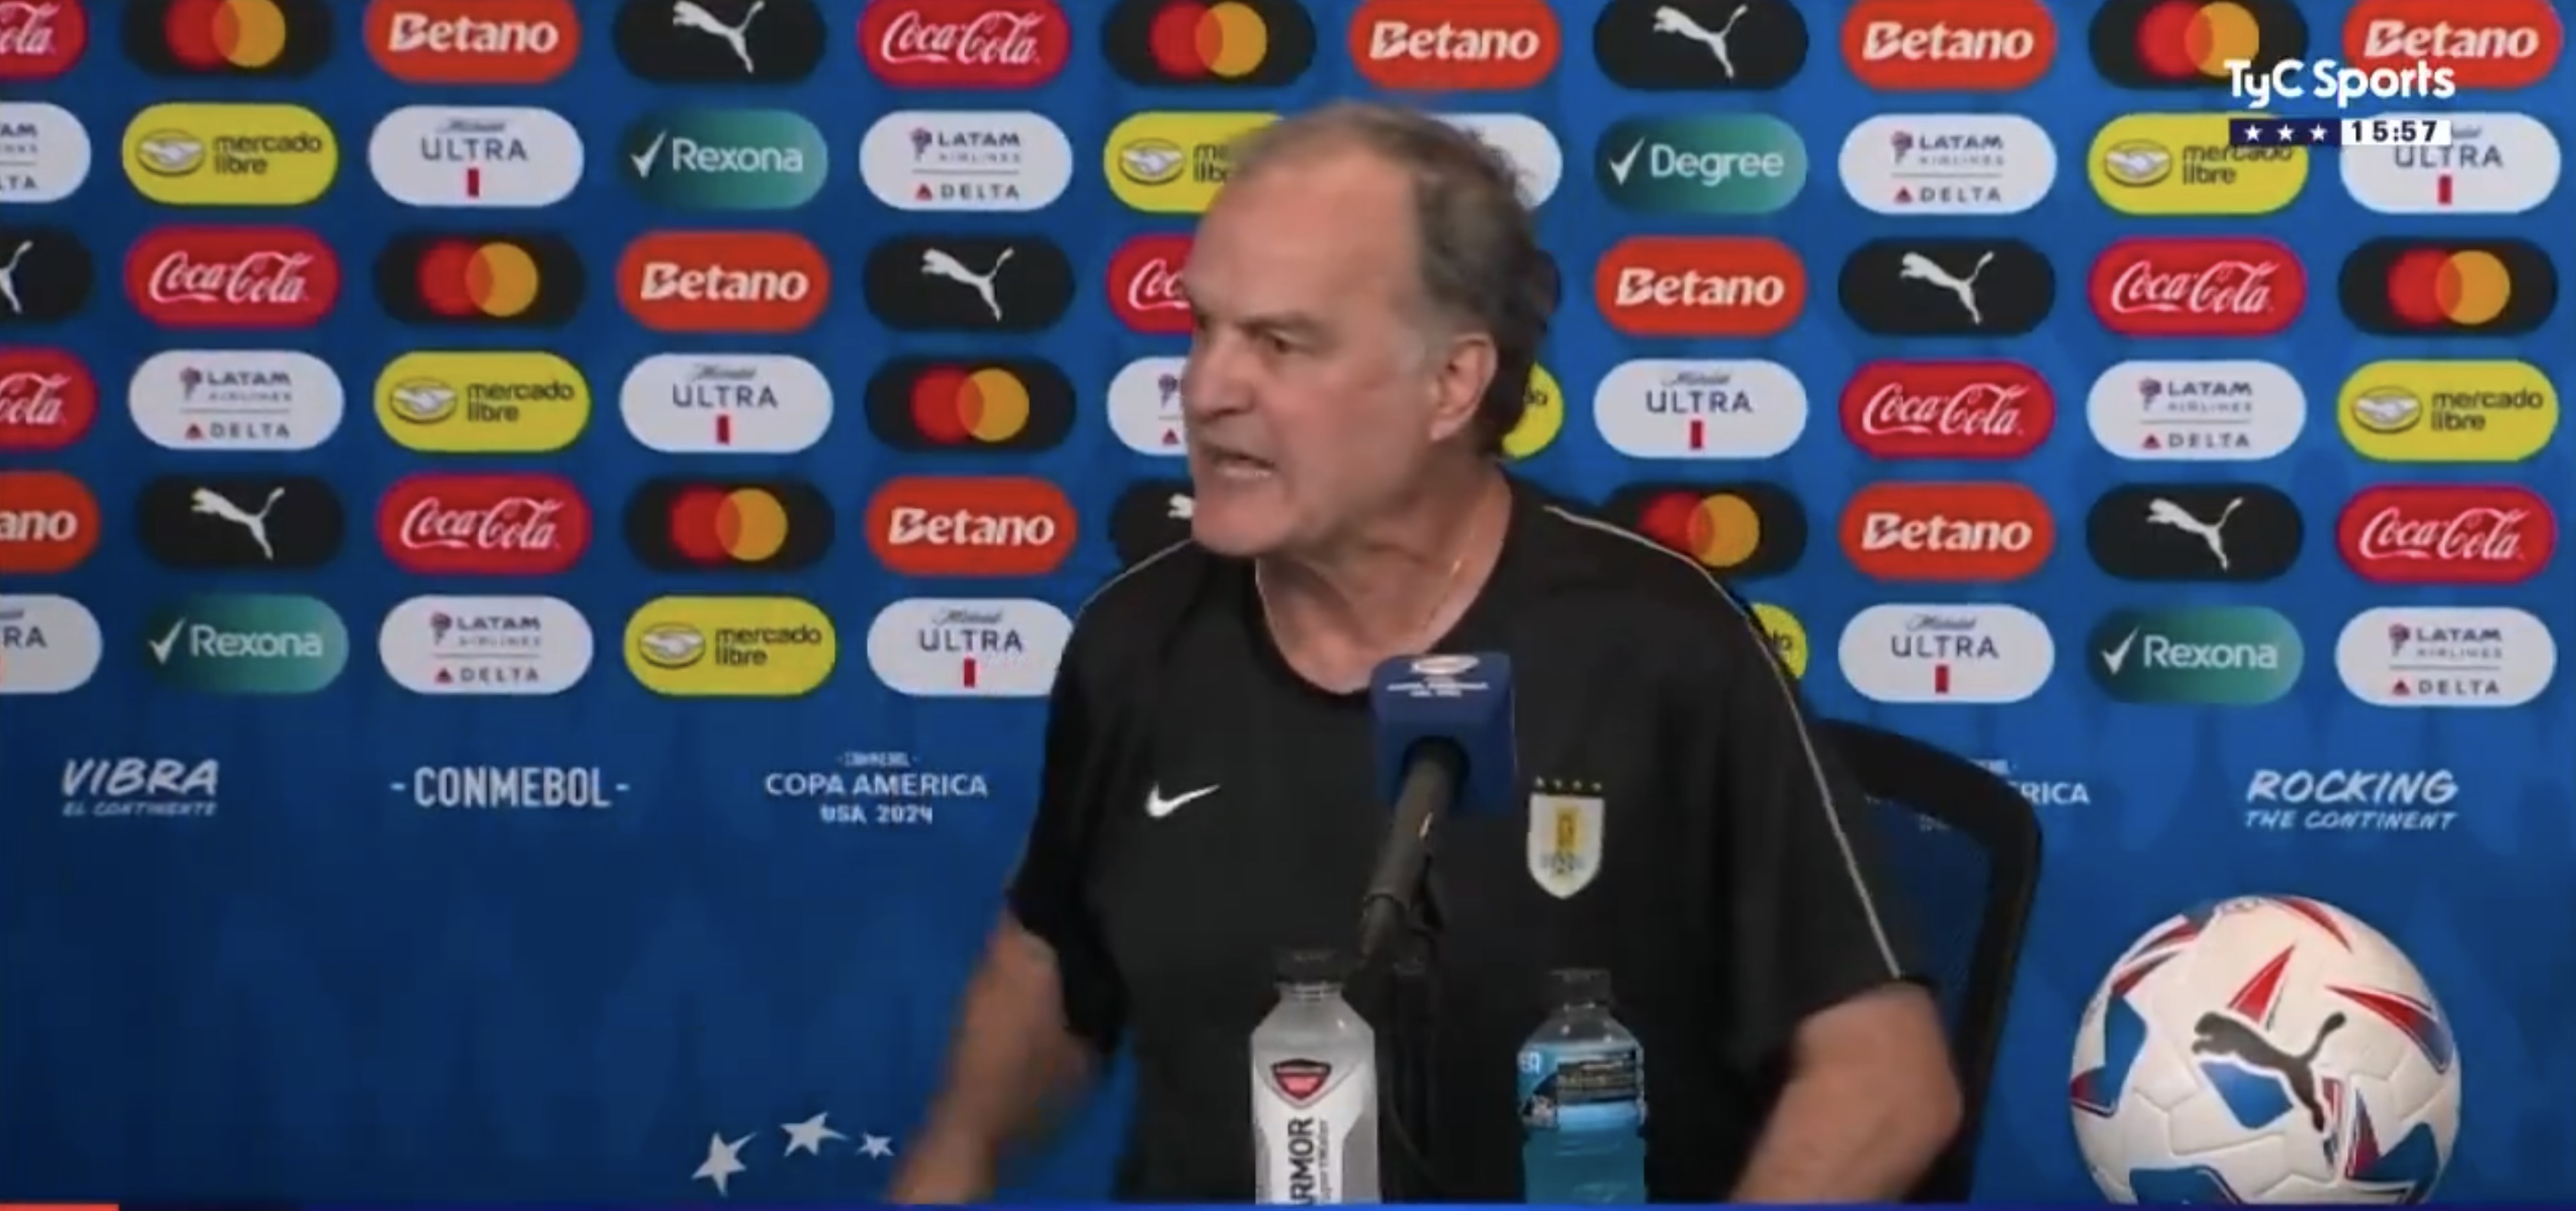 Ex-Leeds boss tears into Copa America organisers in epic press conference rant